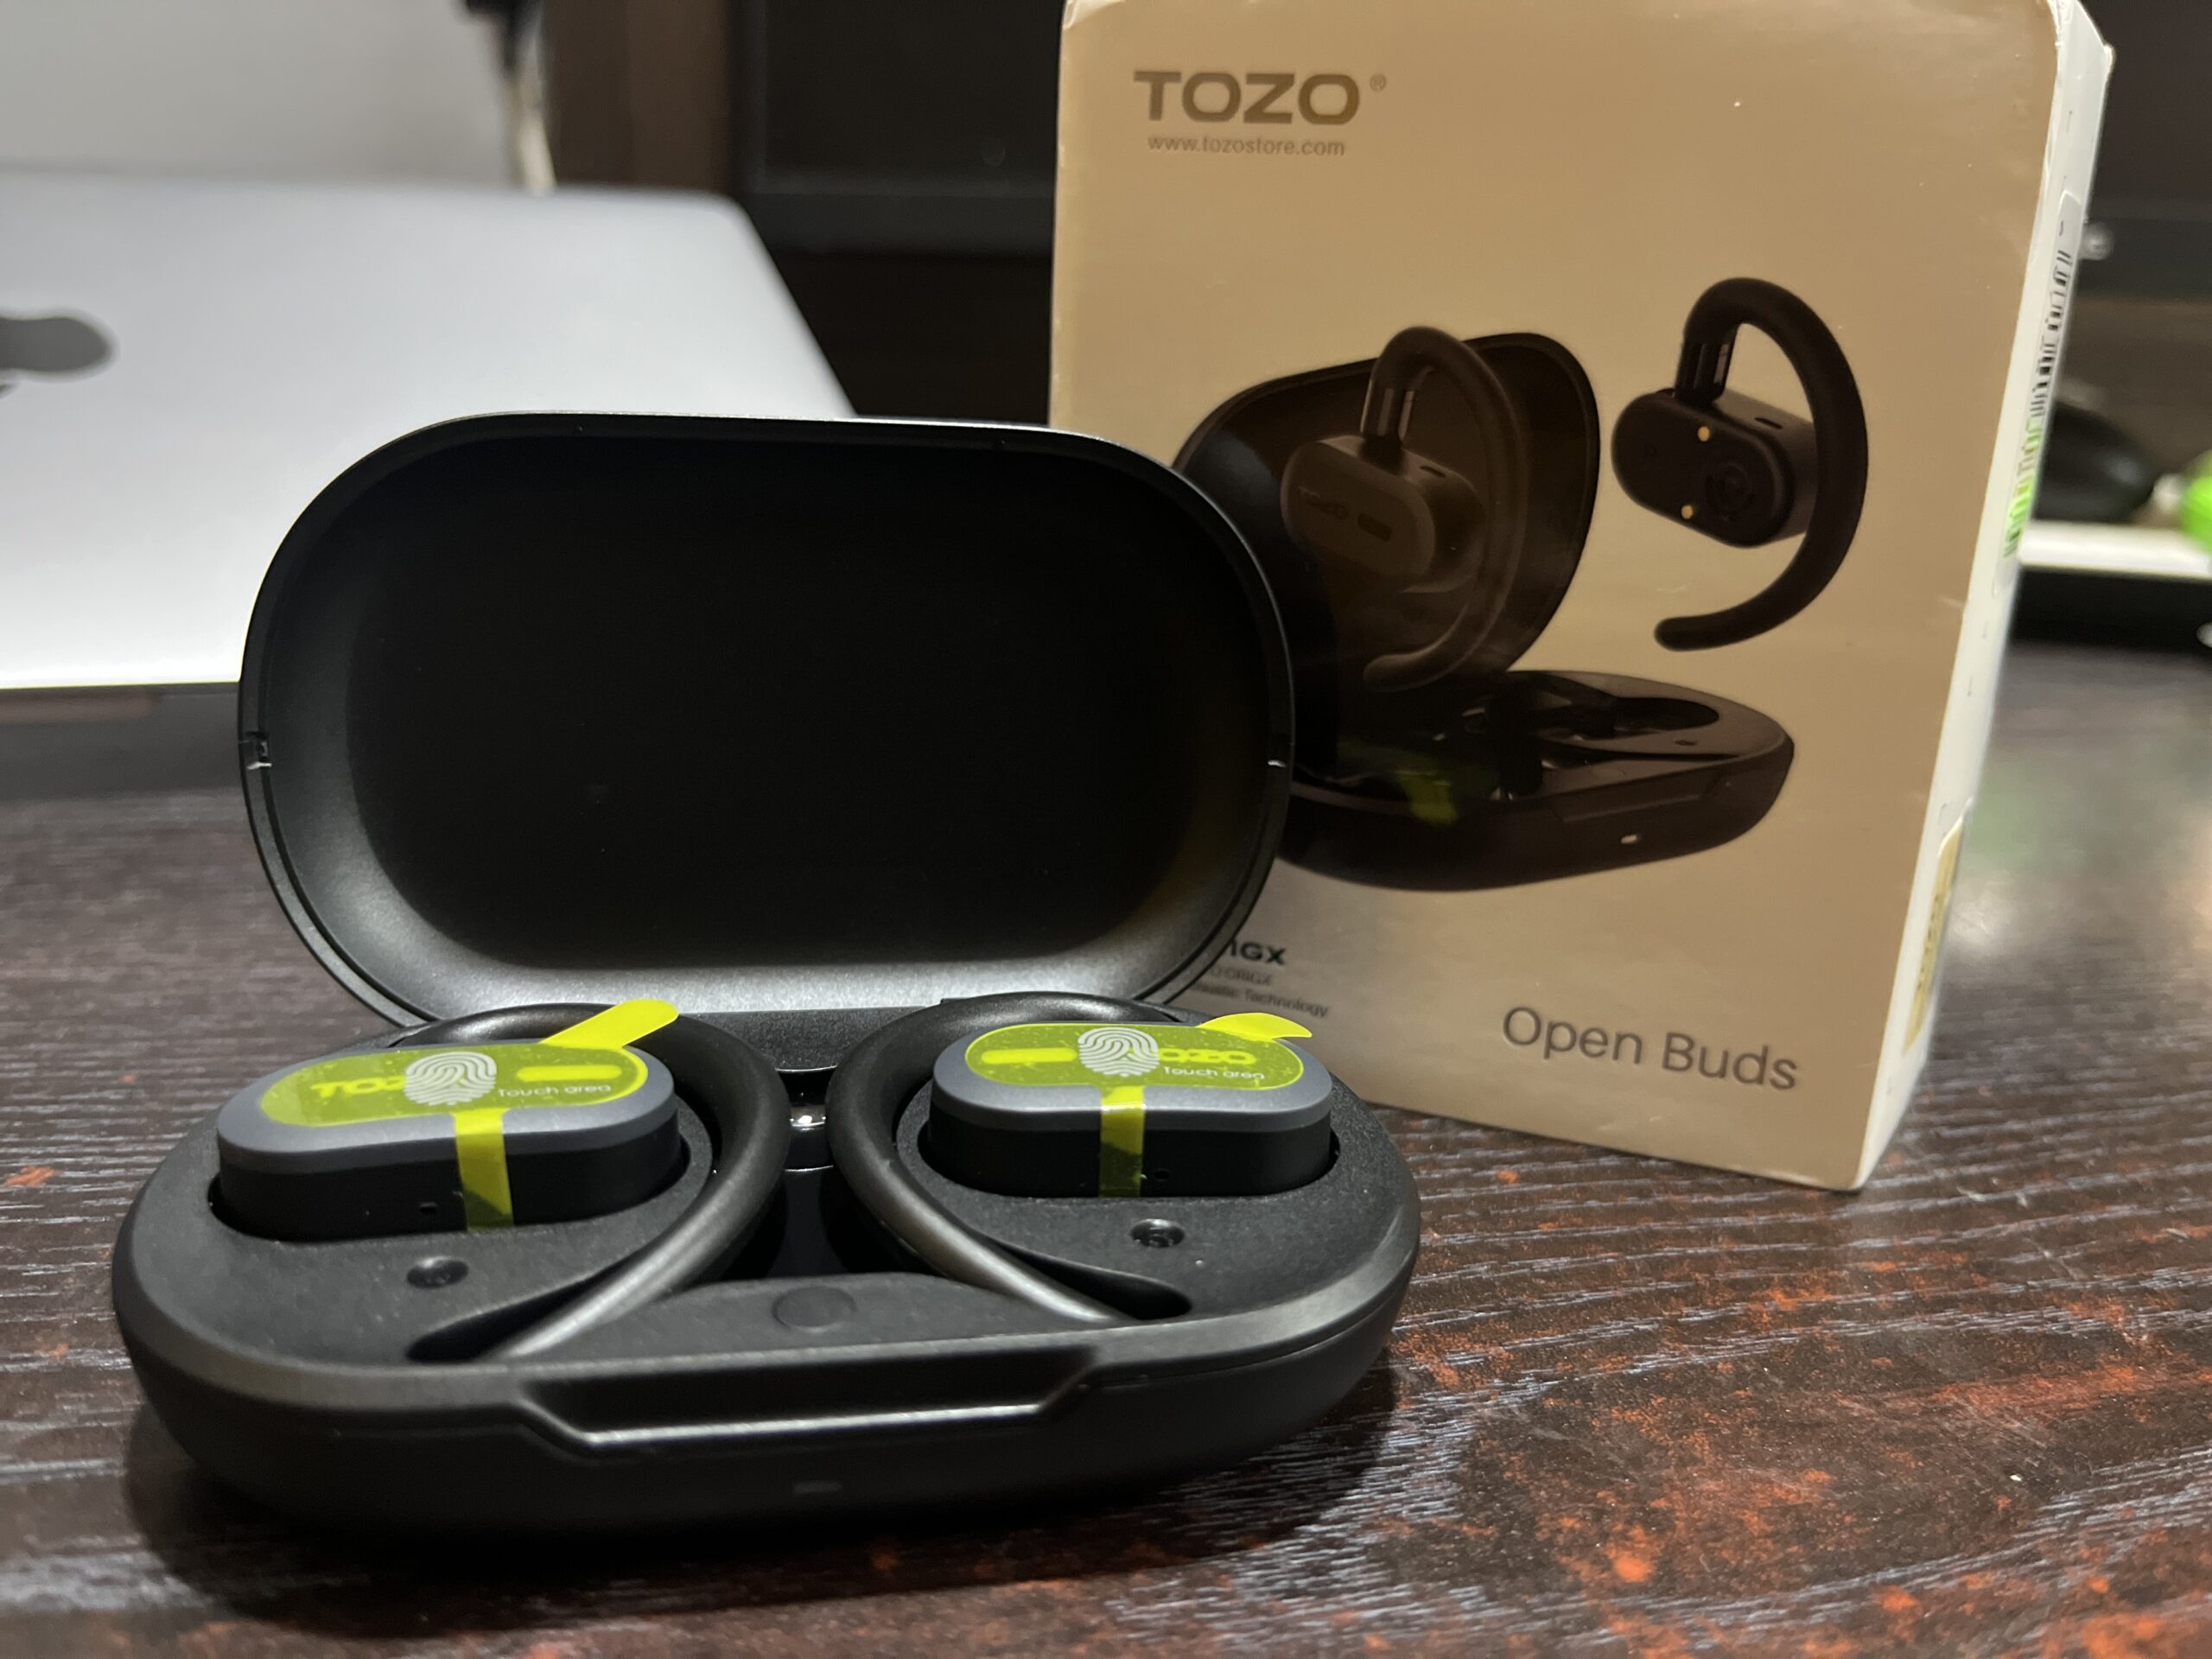  TOZO OpenBuds Review